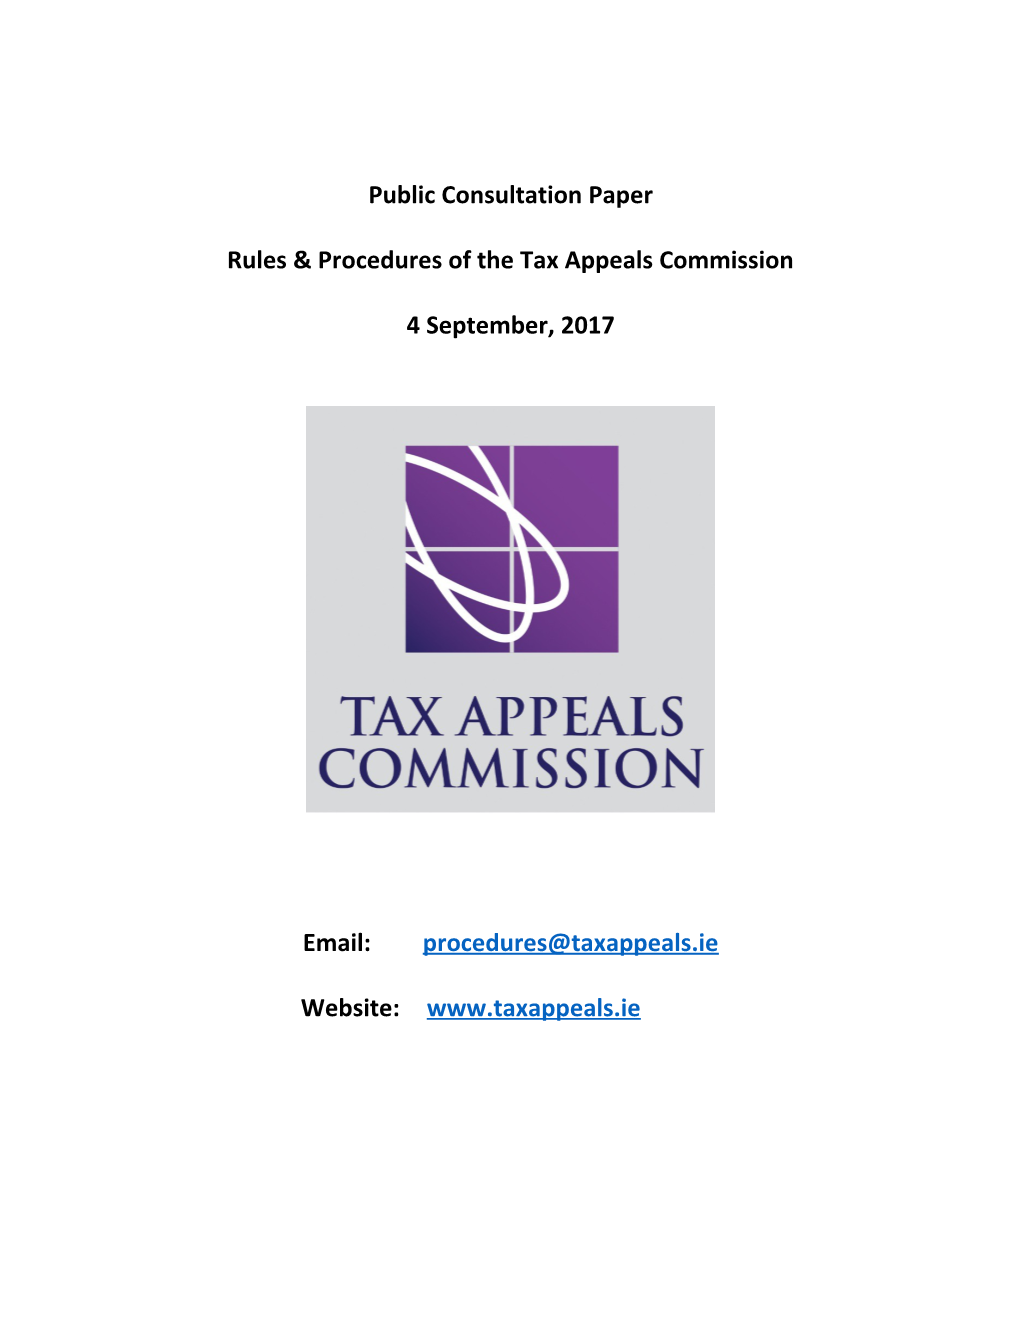 Rules & Procedures of the Tax Appeals Commission